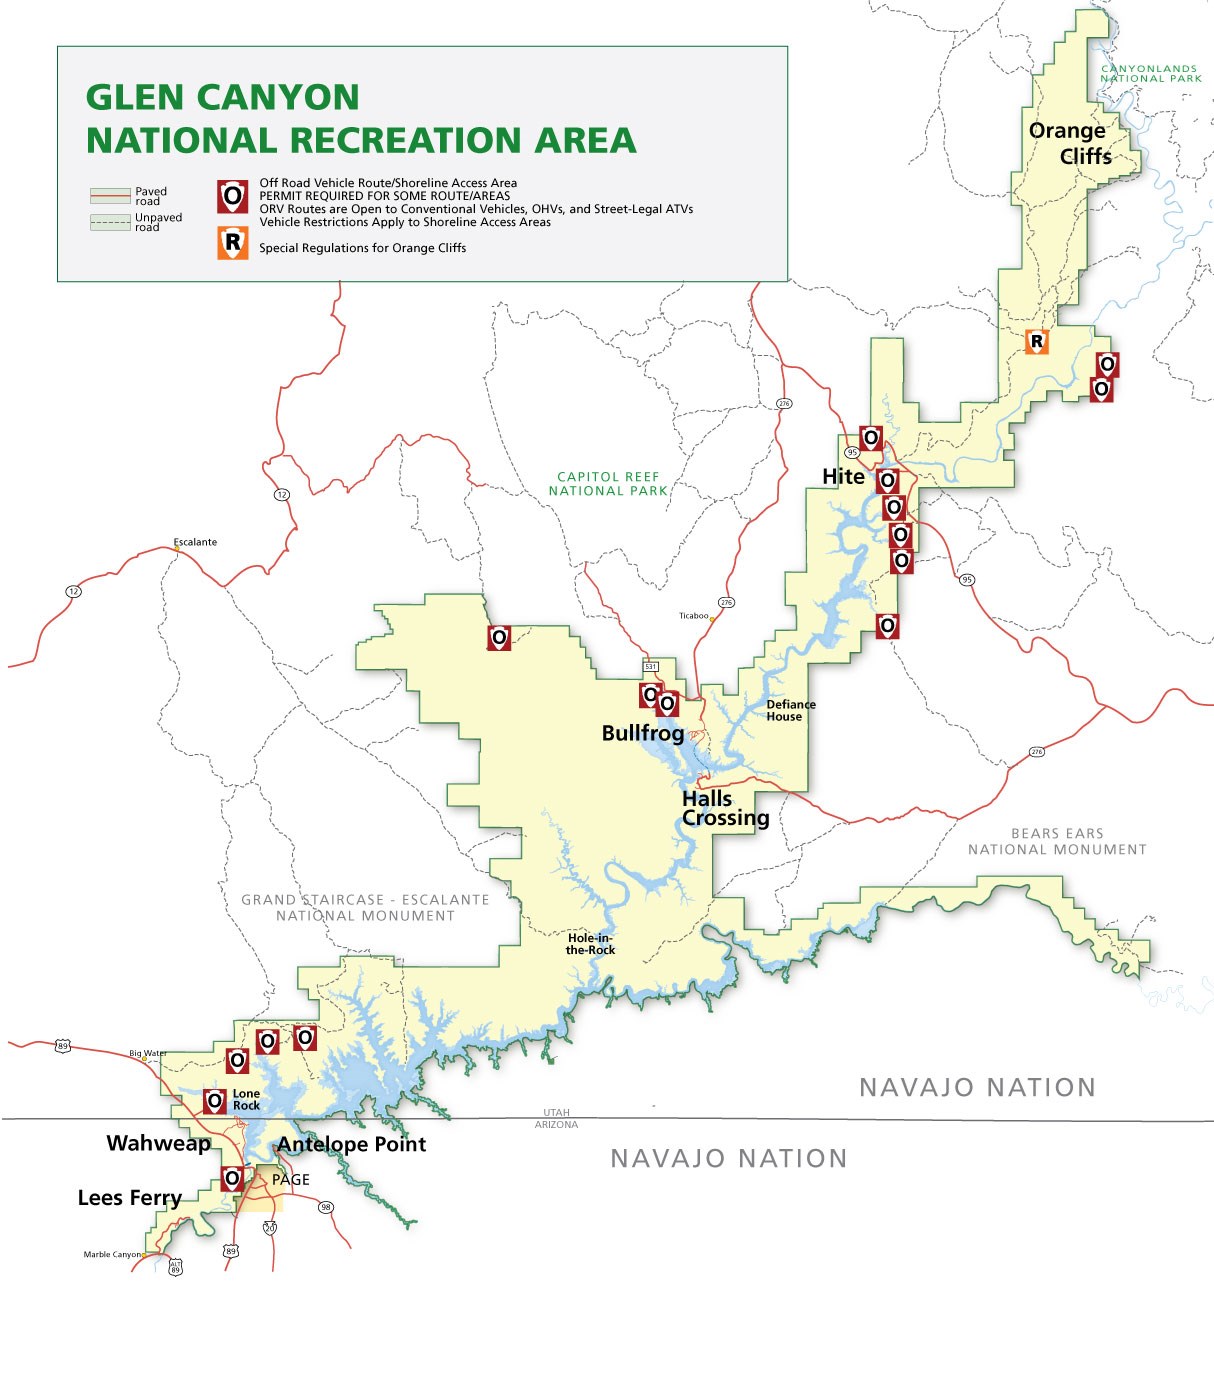 A map of Glen Canyon National Recreation area with 16 red arrowhead icons that can be selected to view ORV maps.